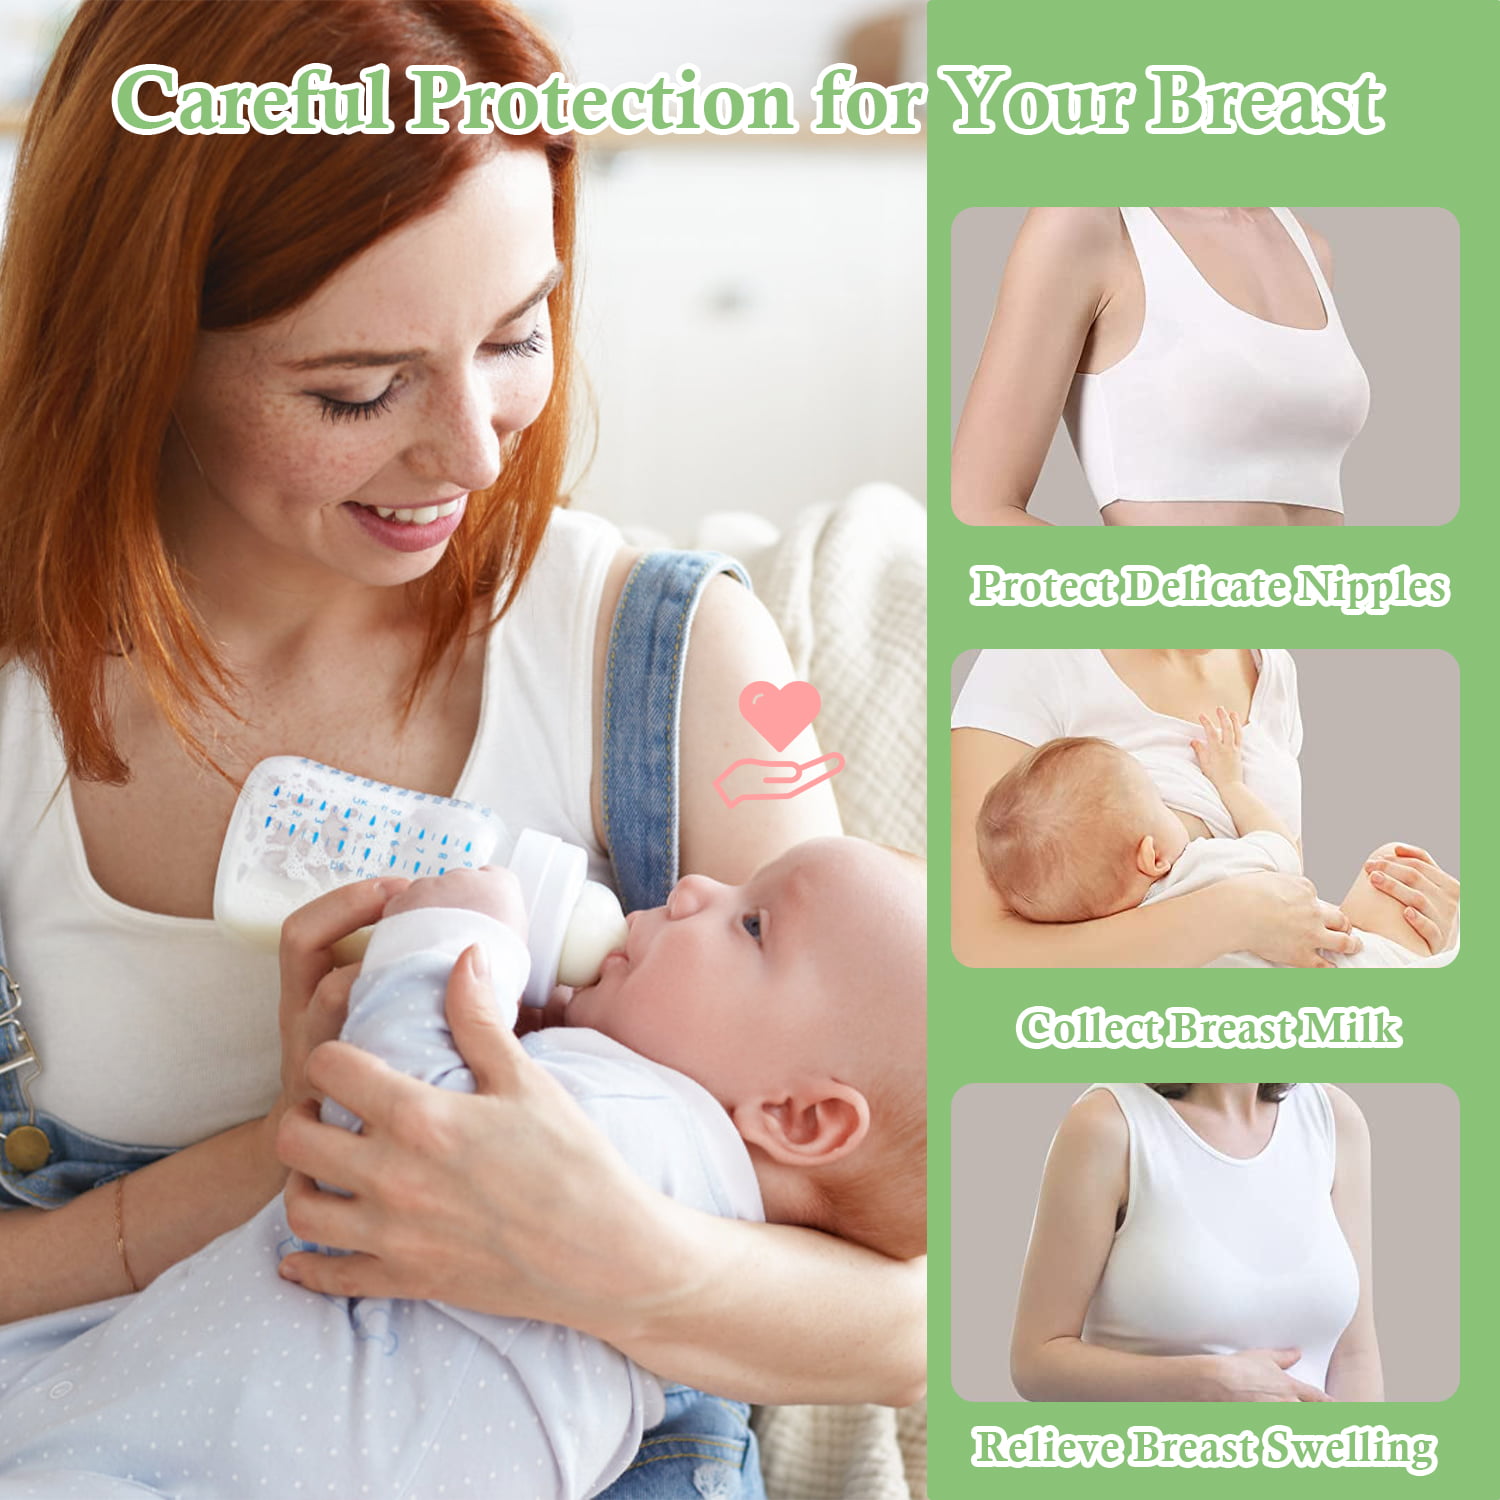 Breast Shell Protects Sensitive Nipples and Collects Breast Milk -  SweetCare United States